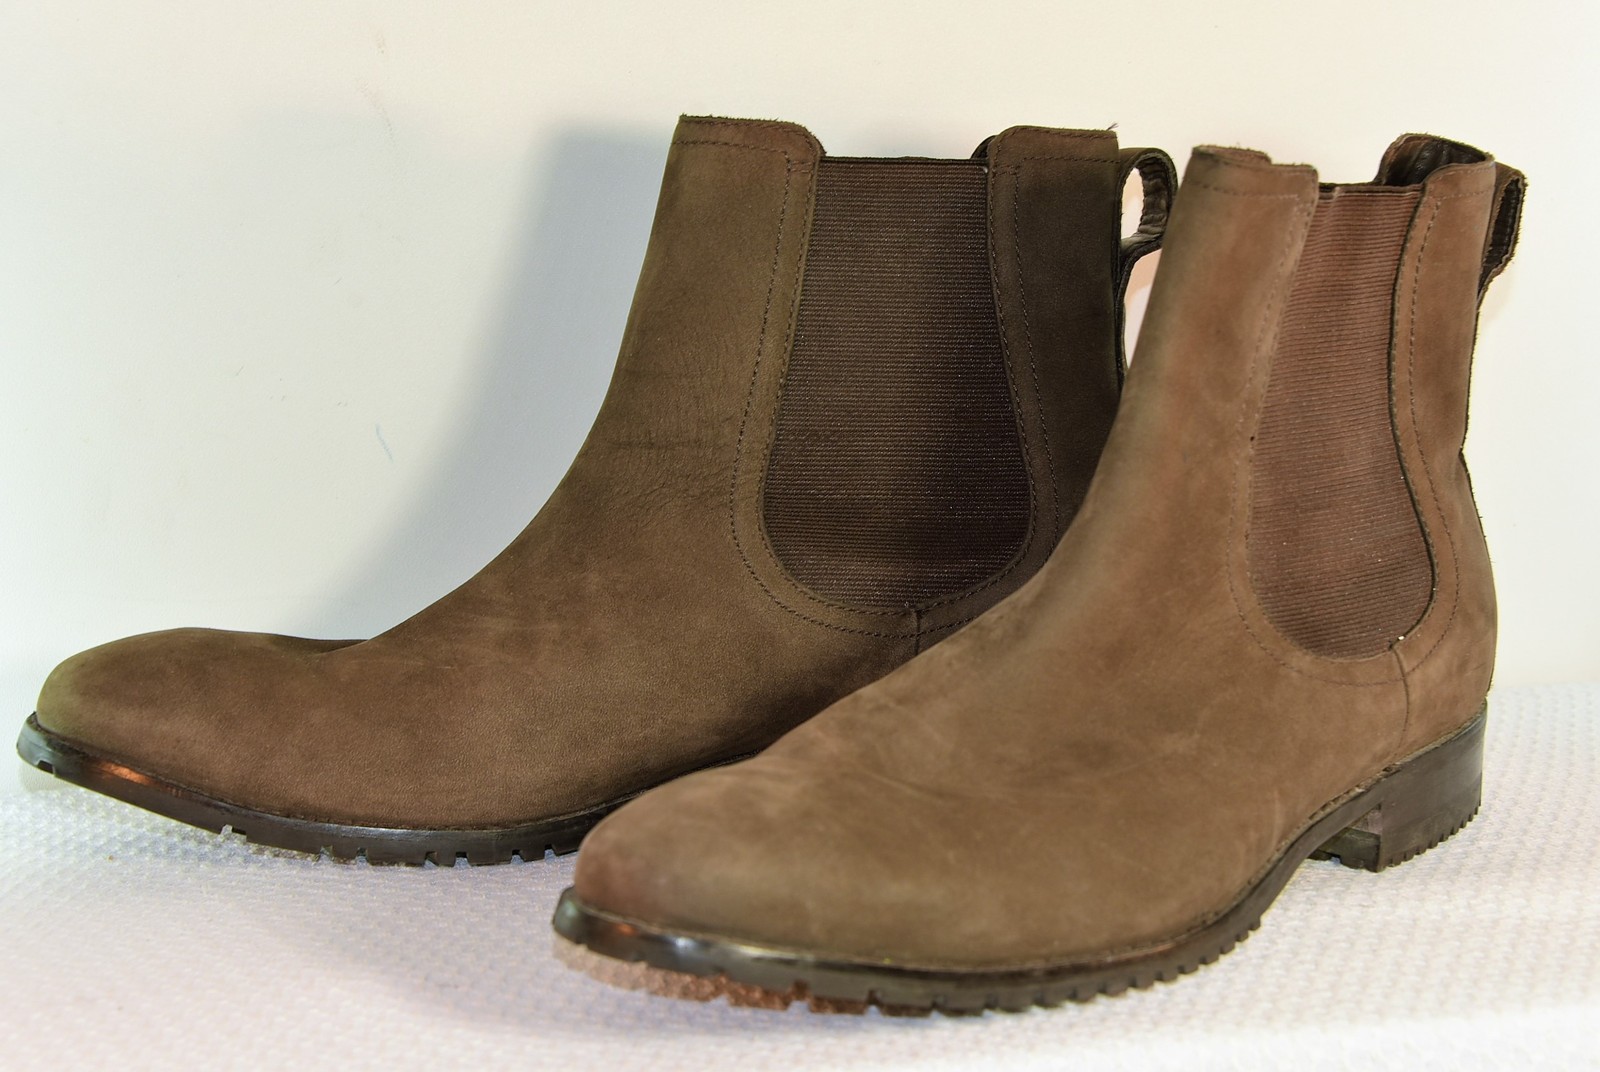 Nike Suede Chelsea Boots - Boots